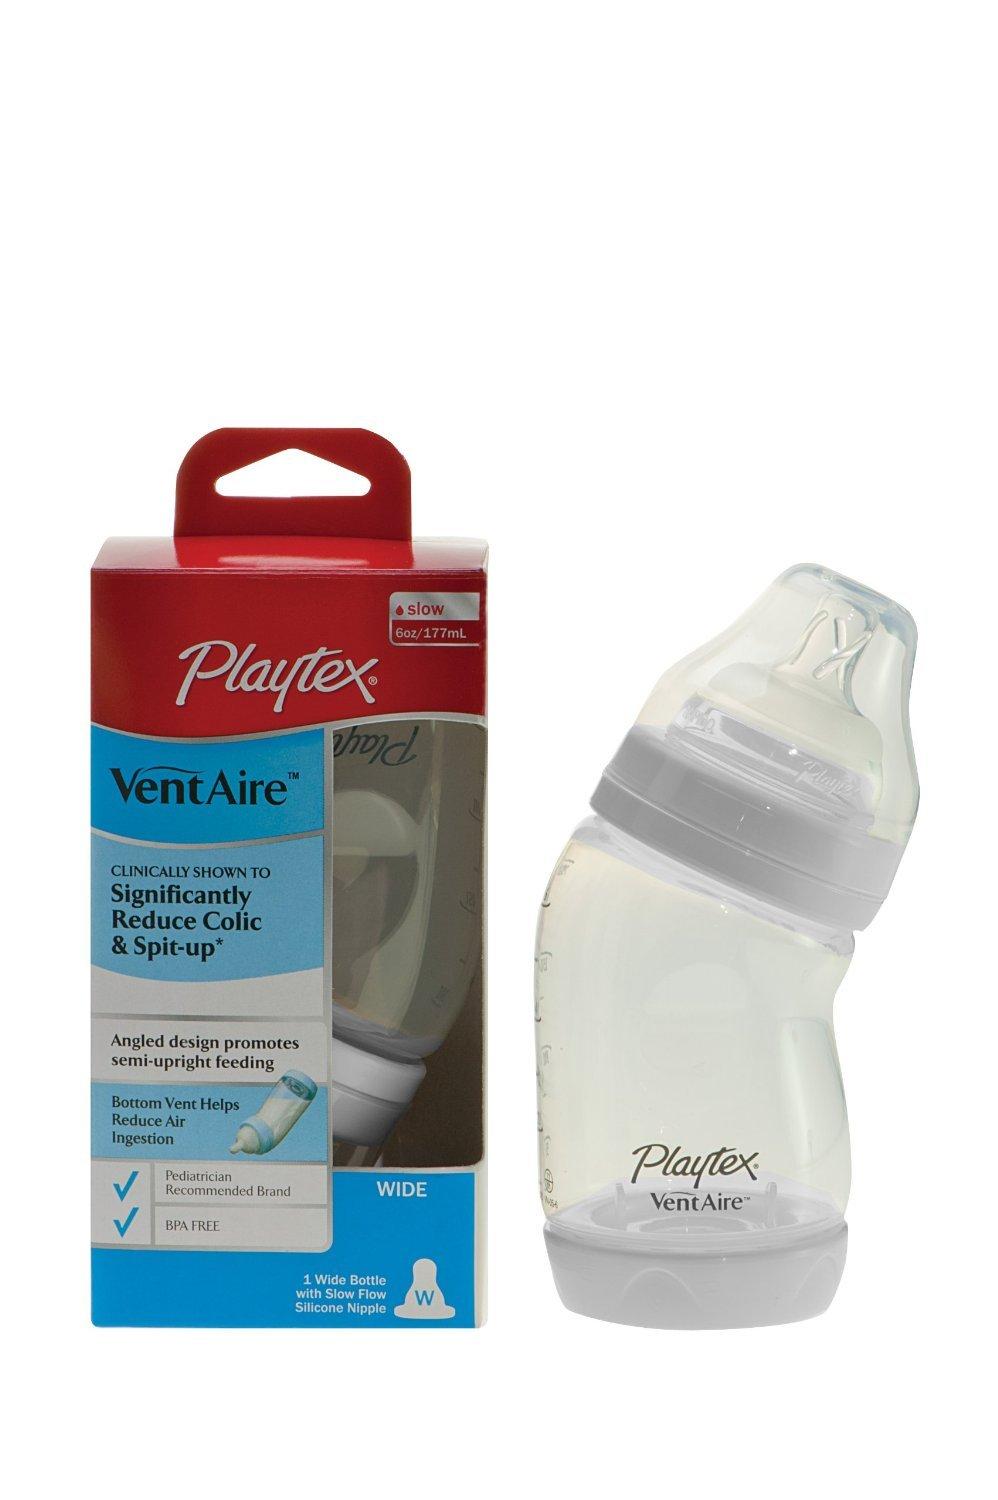 Playtex VentAire Advanced Wide Bottle, 9 Ounce Kuwait